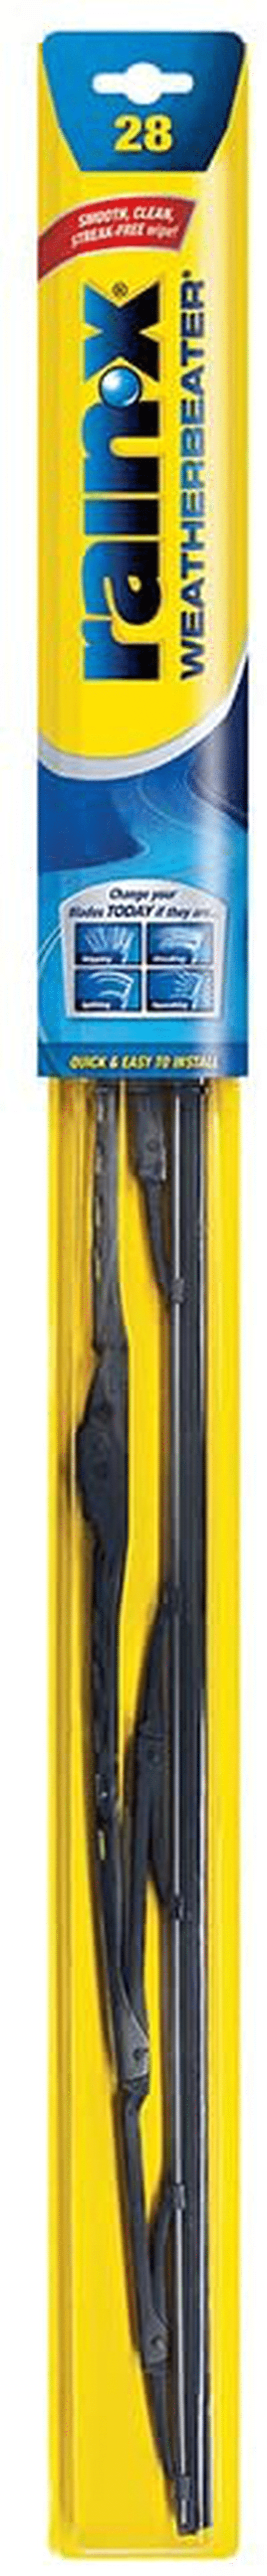 Rain-X RX30218 Weatherbeater Wiper Blade - 18-Inches - (Pack of 1) Vehicles & Parts > Vehicle Parts & Accessories > Motor Vehicle Parts Rain-X Single pack 28-Inches 